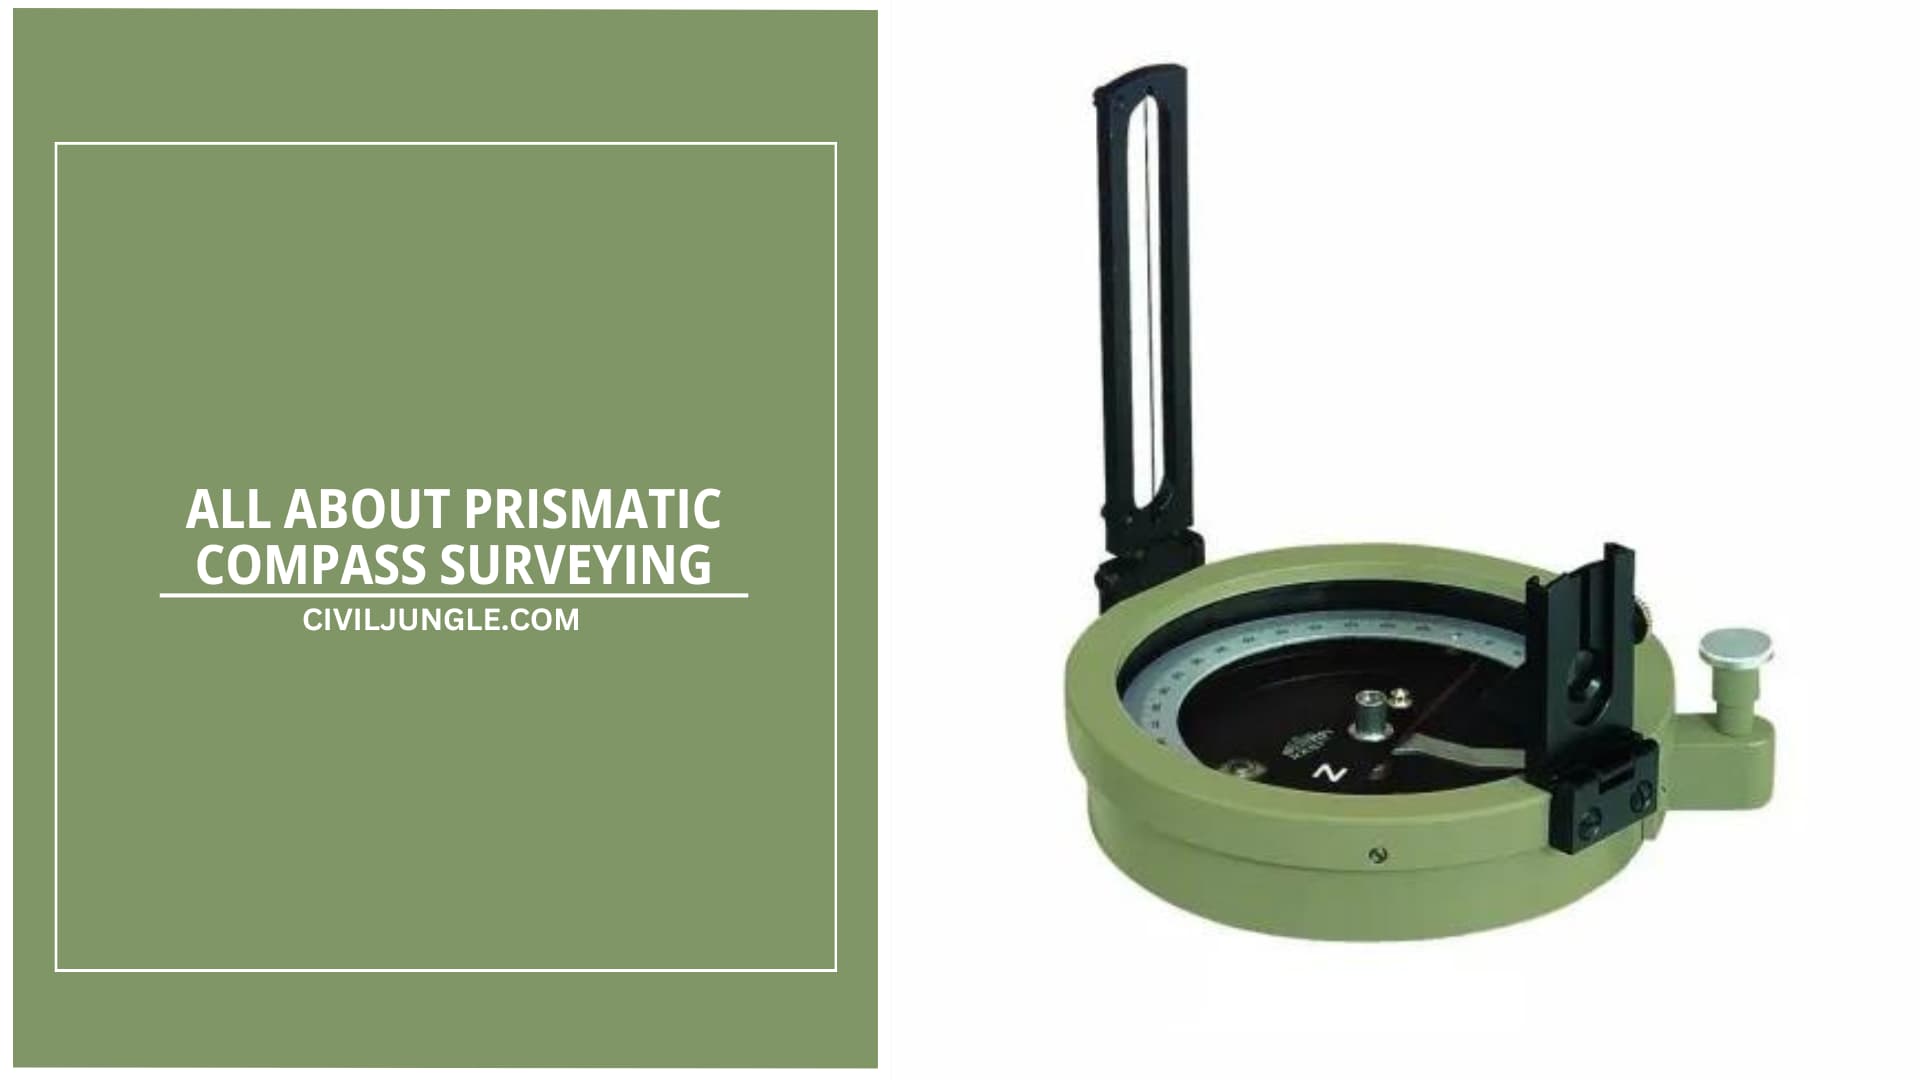 All About Prismatic Compass Surveying